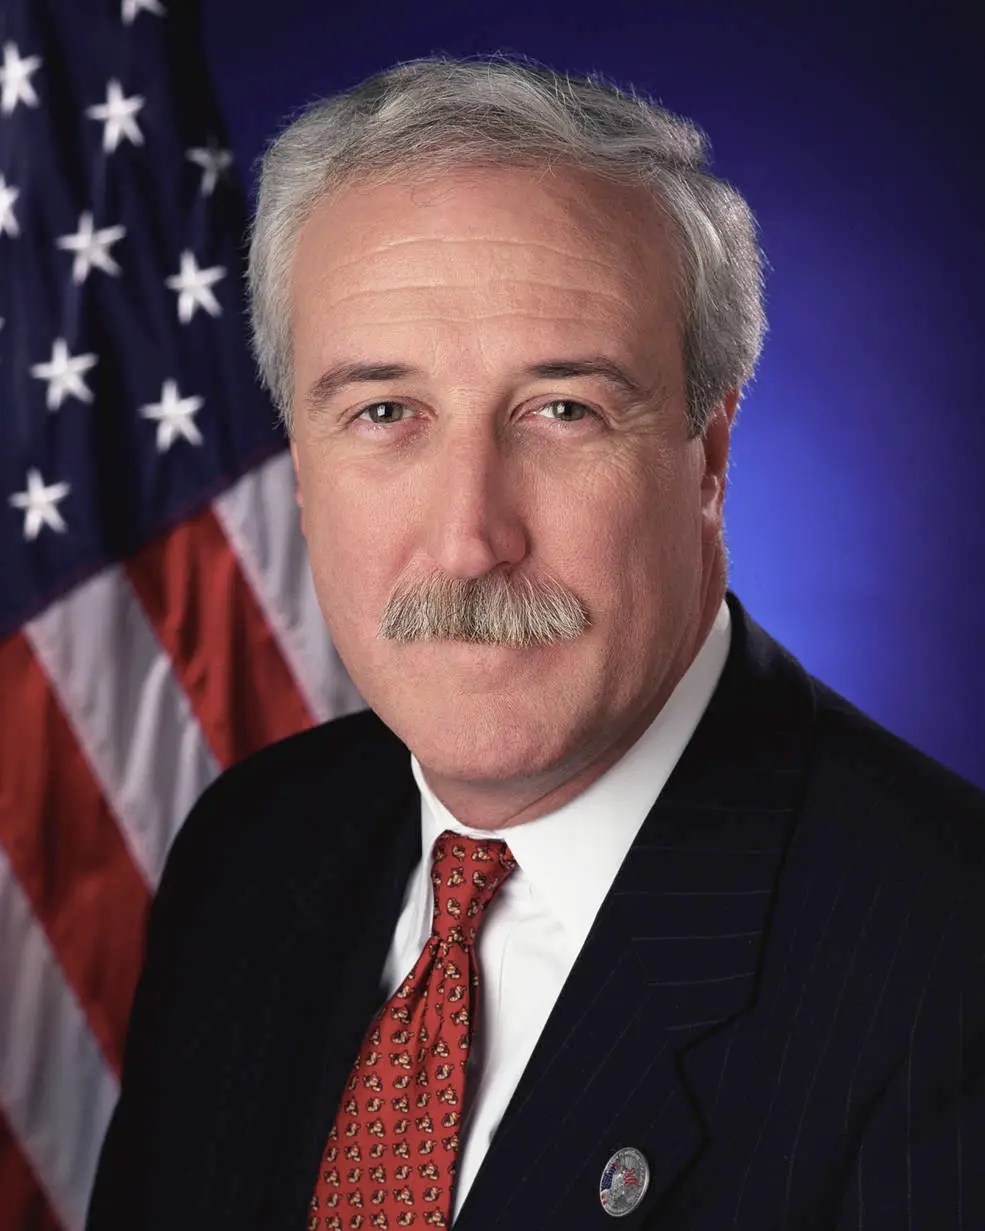 Headshot of a man with white hair and mustache wearing a navy blue jacket, white shirt and red tie.